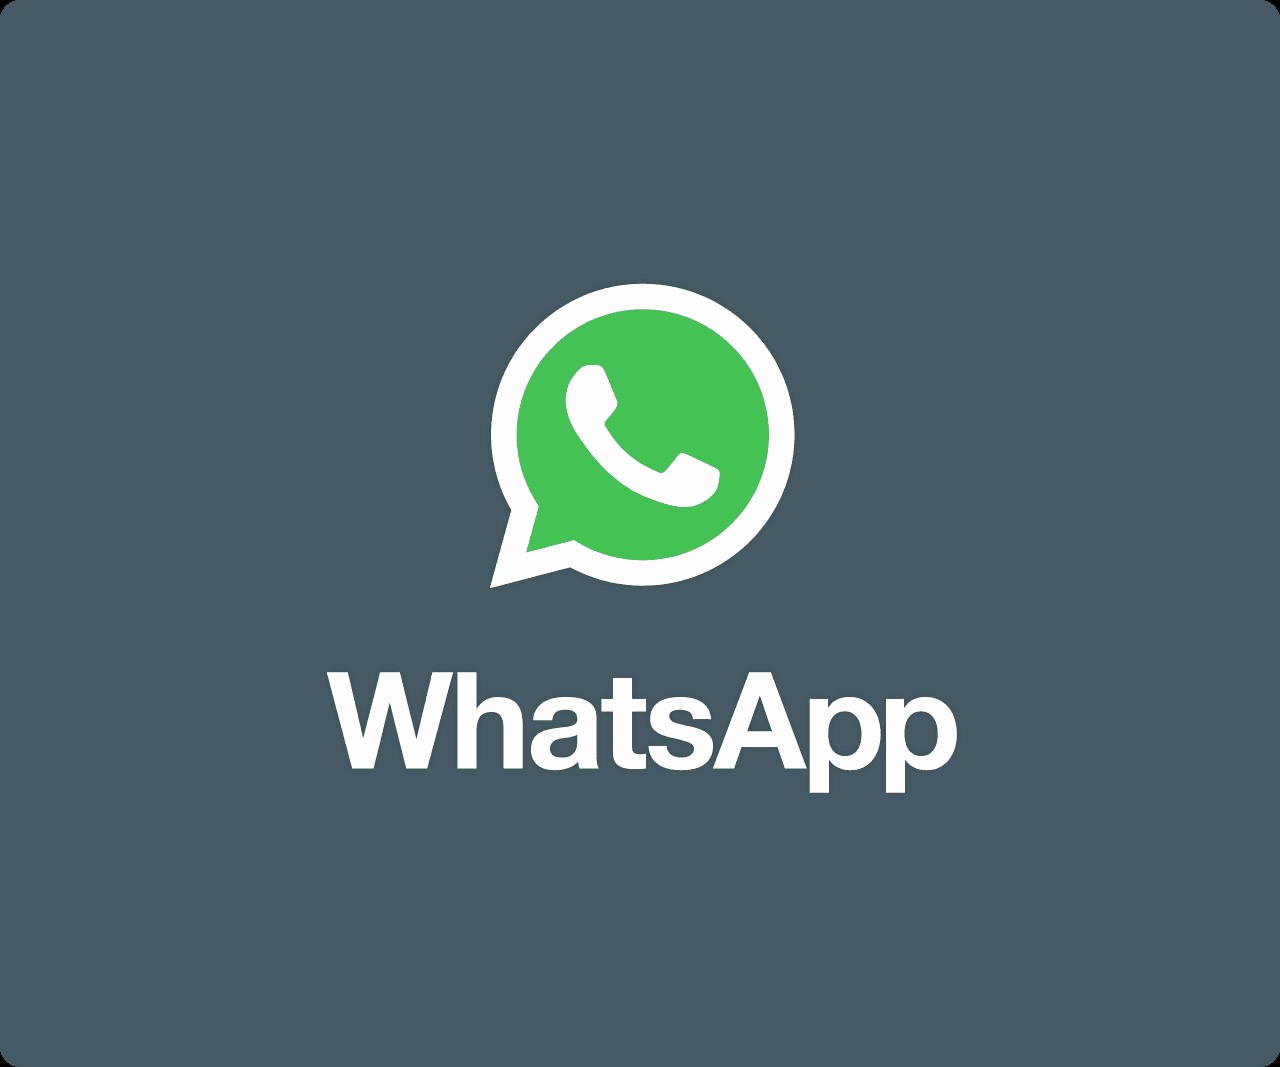 Join our whats app Group